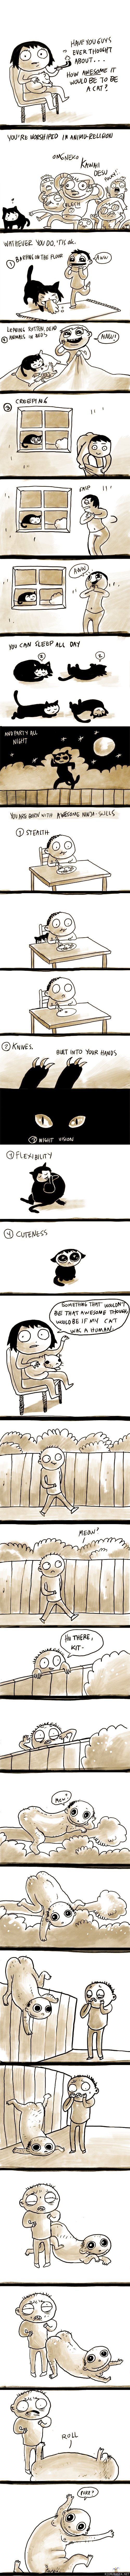 Being a Cat is Awesome...